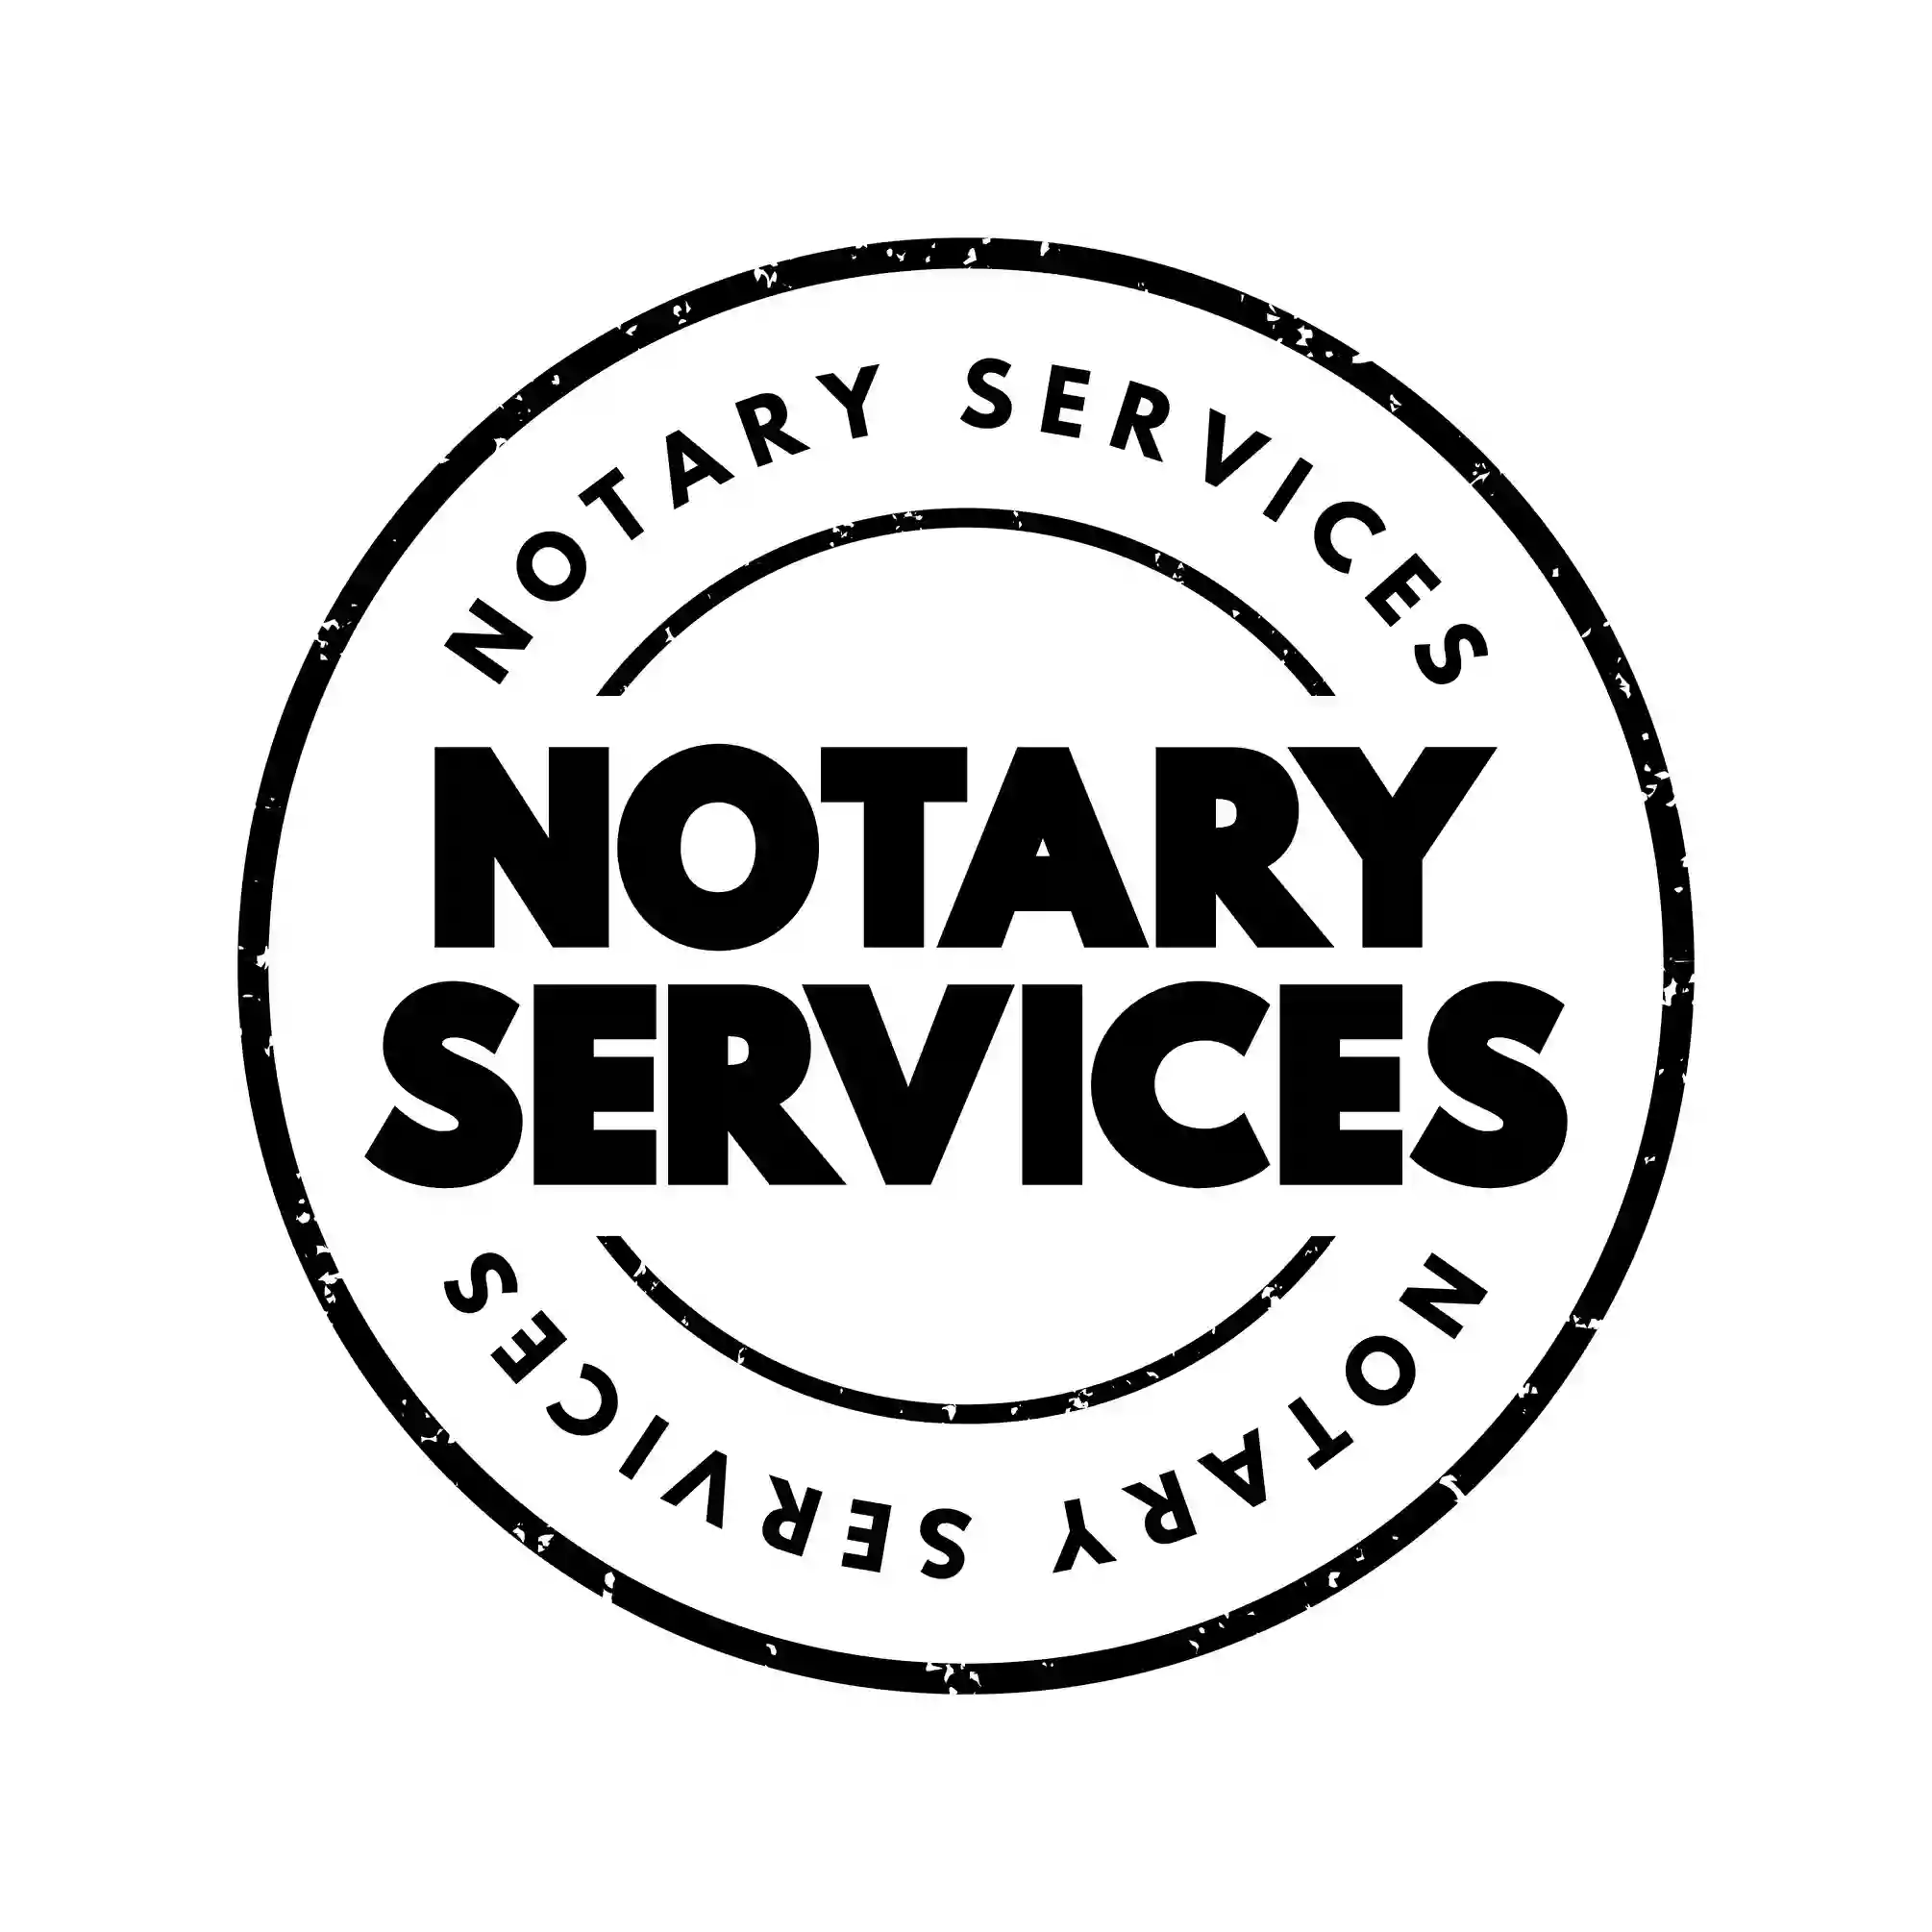 San Diego City Notary and Apostille